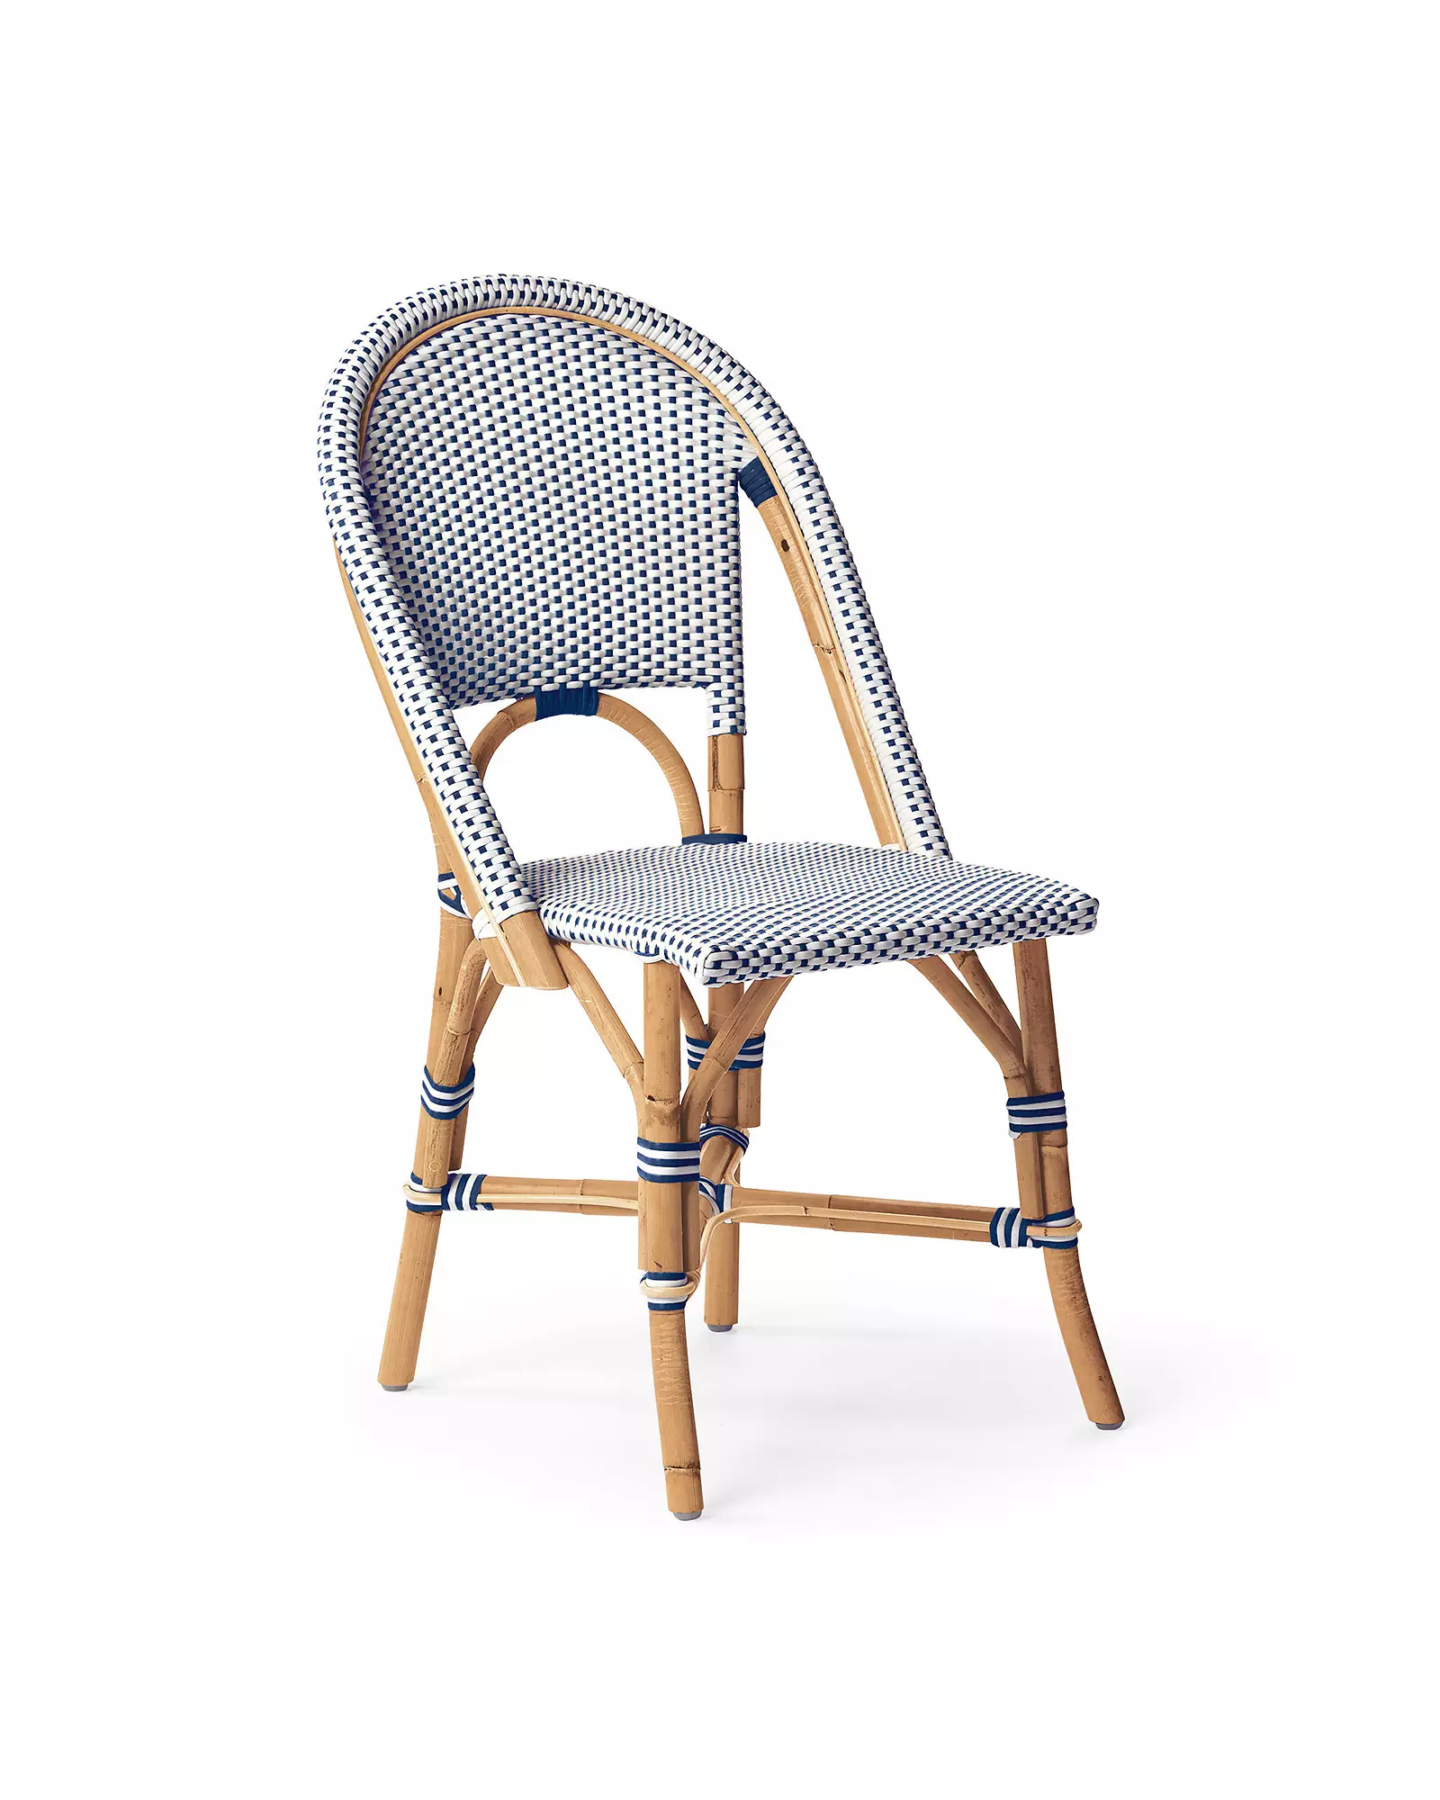 Riviera Dining Chair in navy/white at Serena & Lily